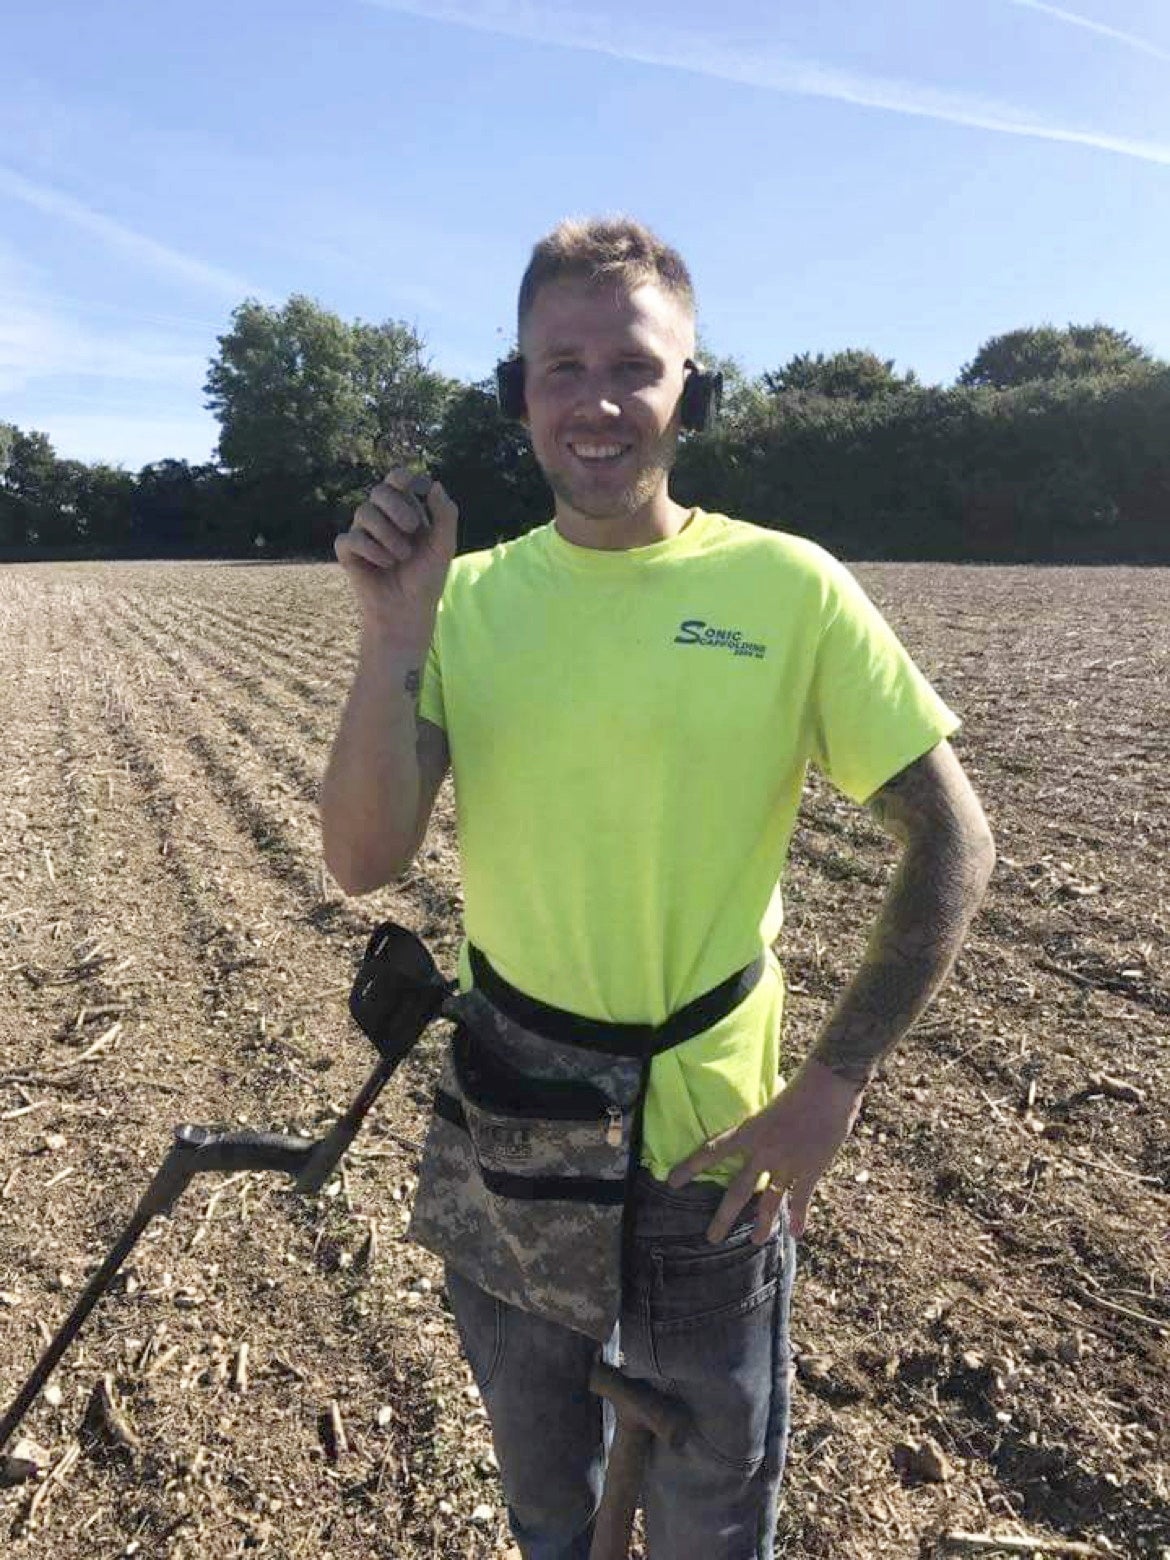 The find by detectorist Lewis Fudge has been described by experts as ‘one of the outstanding discoveries of recent decades’